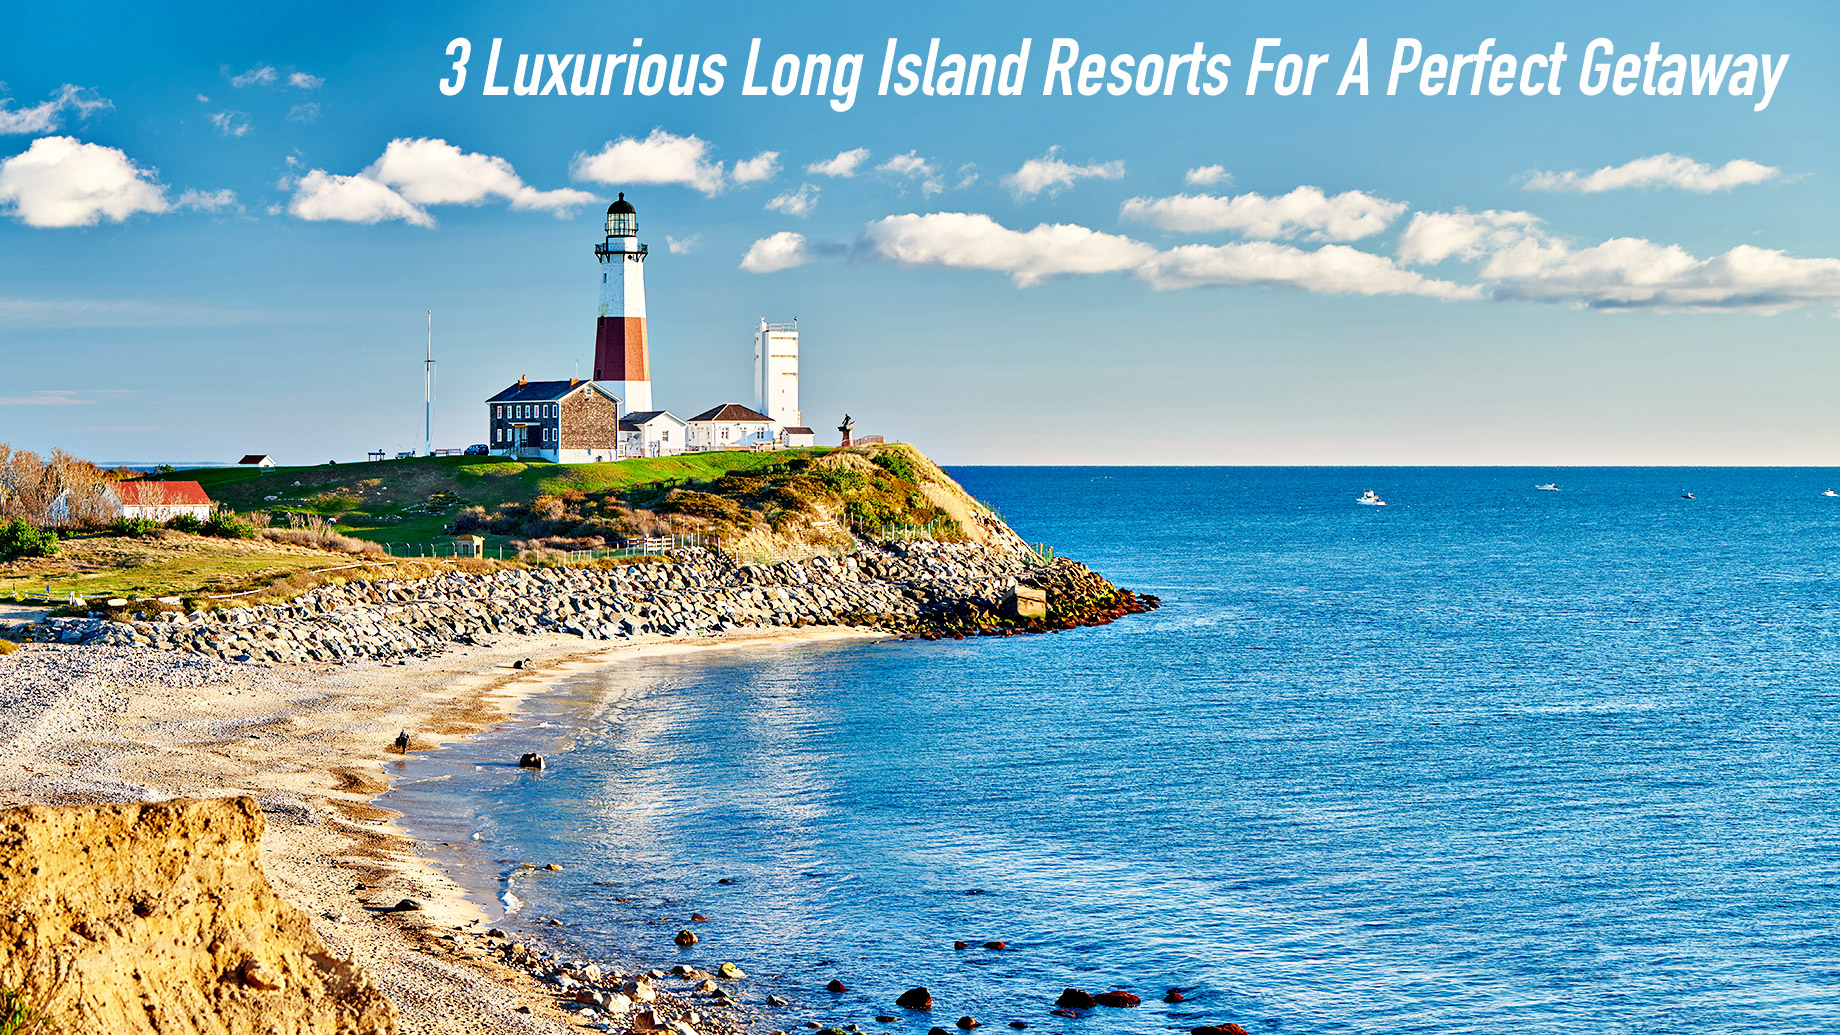 3 Luxurious Long Island Resorts For A Perfect Getaway